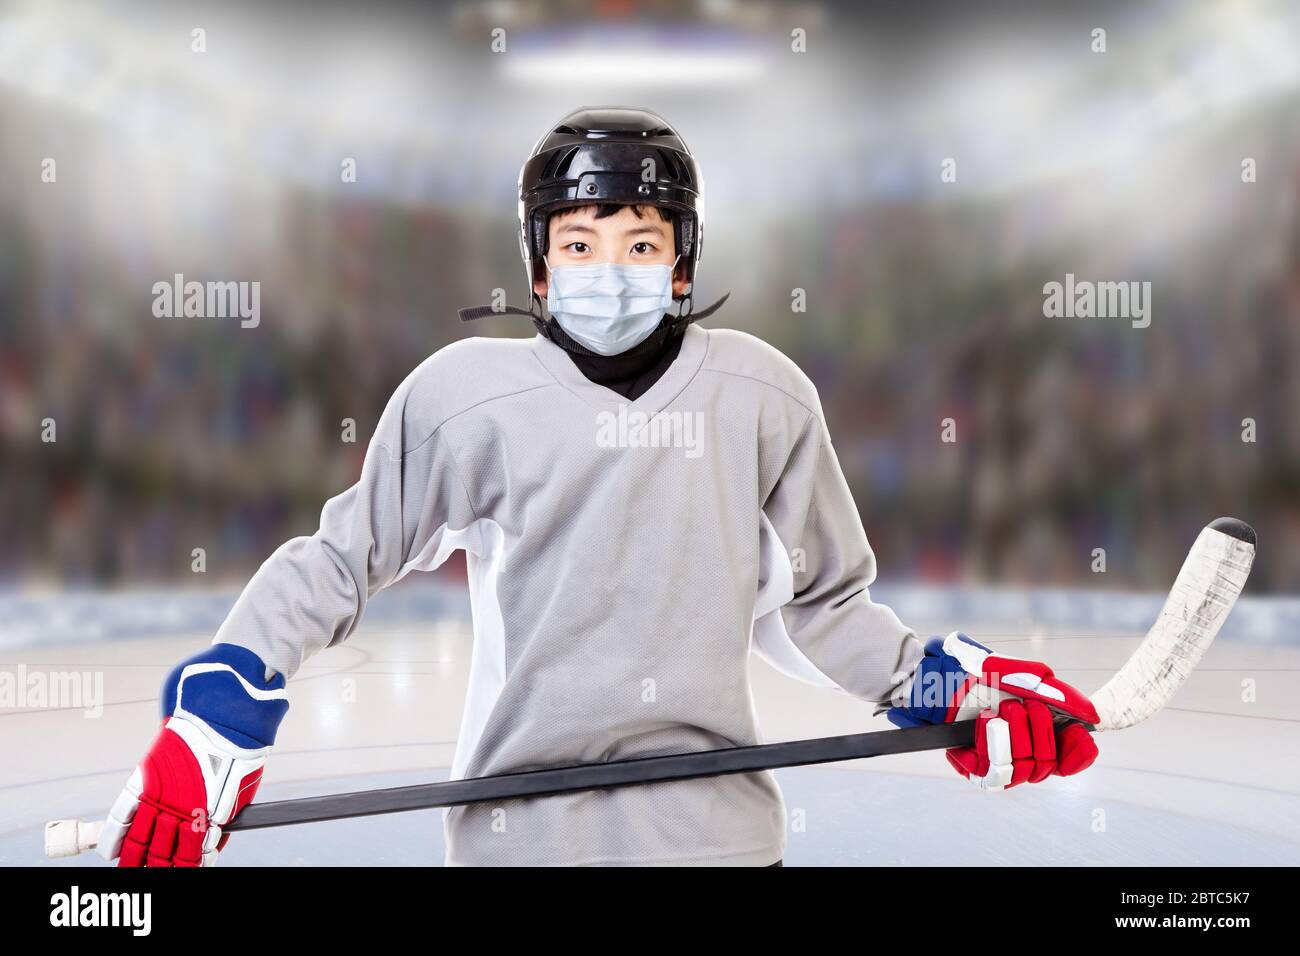 Junior ice hockey player with full equipment and sports uniform posing in fictitious arena with face mask. Concept of new normal in sports to prevent Stock Photo